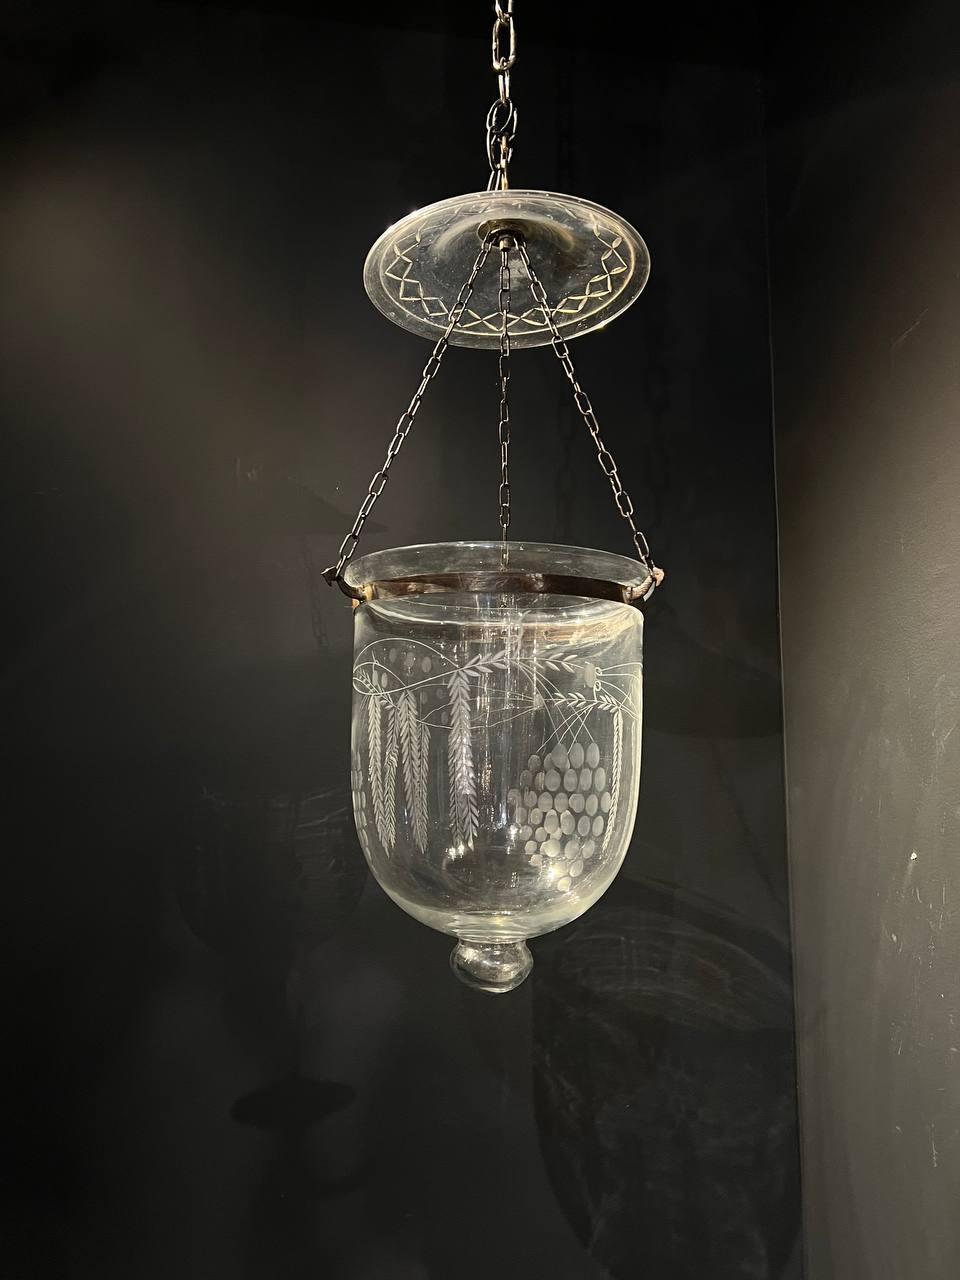 French Provincial 1940's Small Glass Lantern with Grape Design For Sale